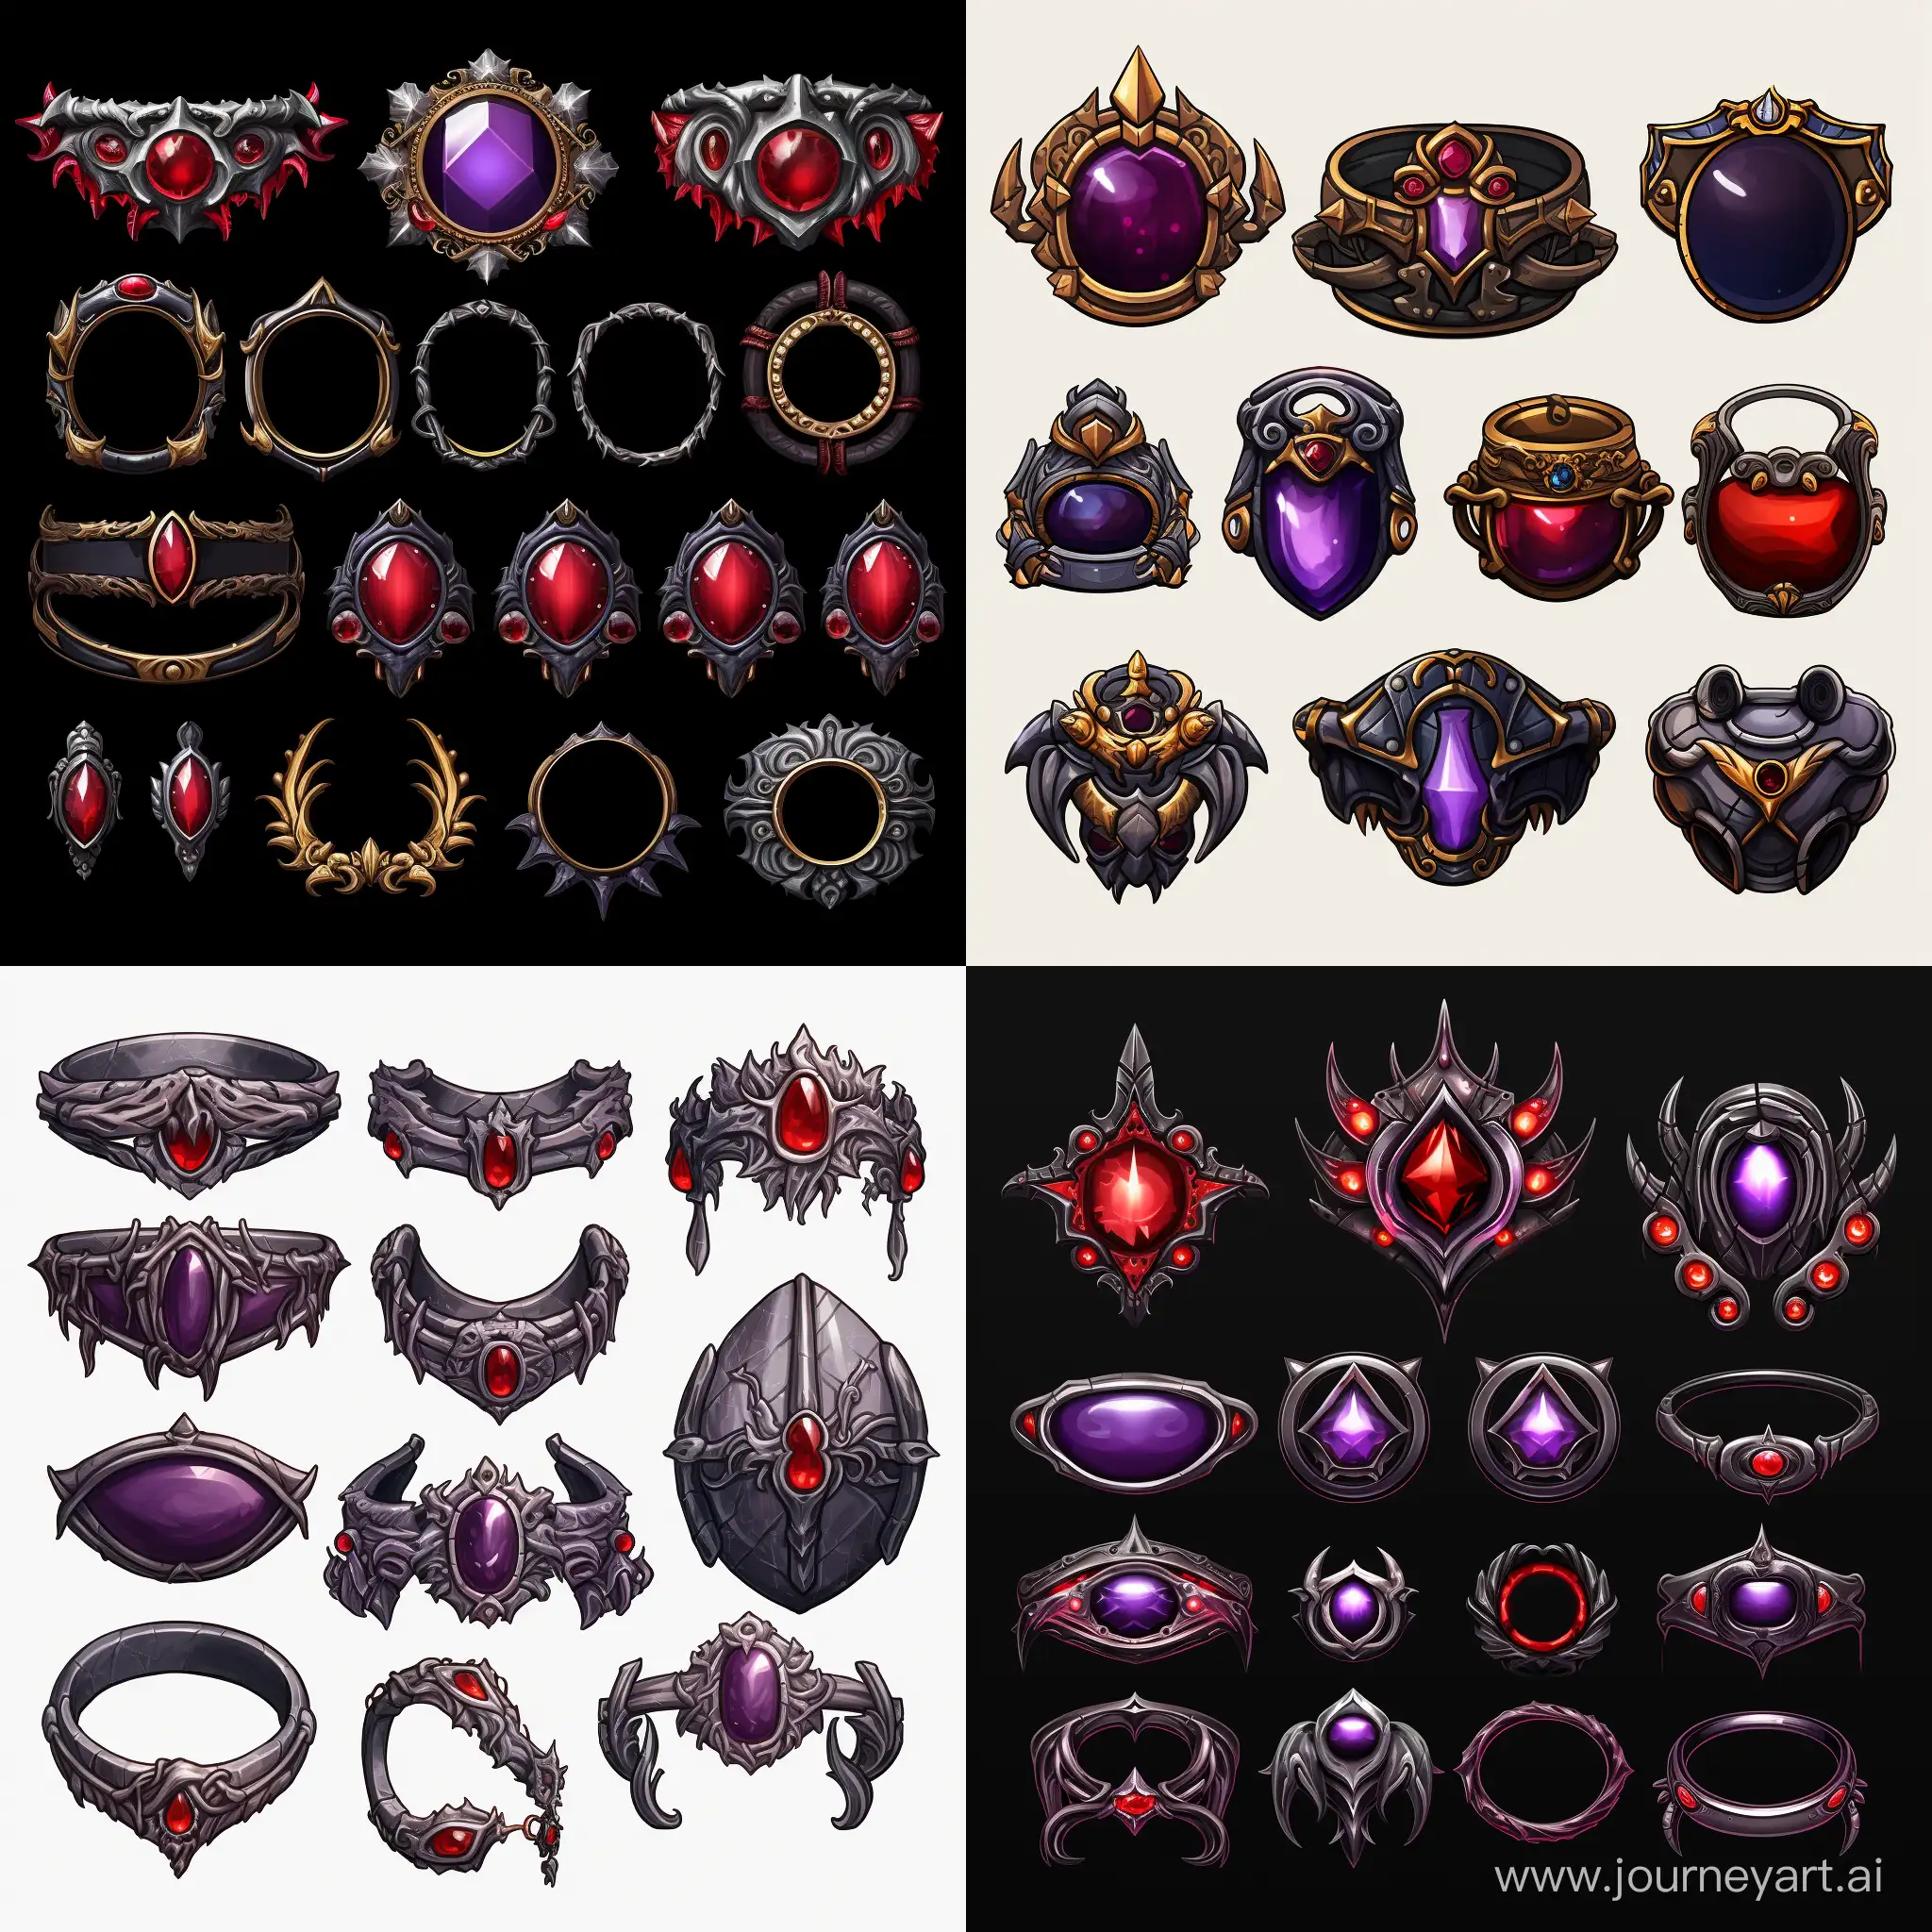 item spritesheet, masks rings scrolls chests only black red white purple colors